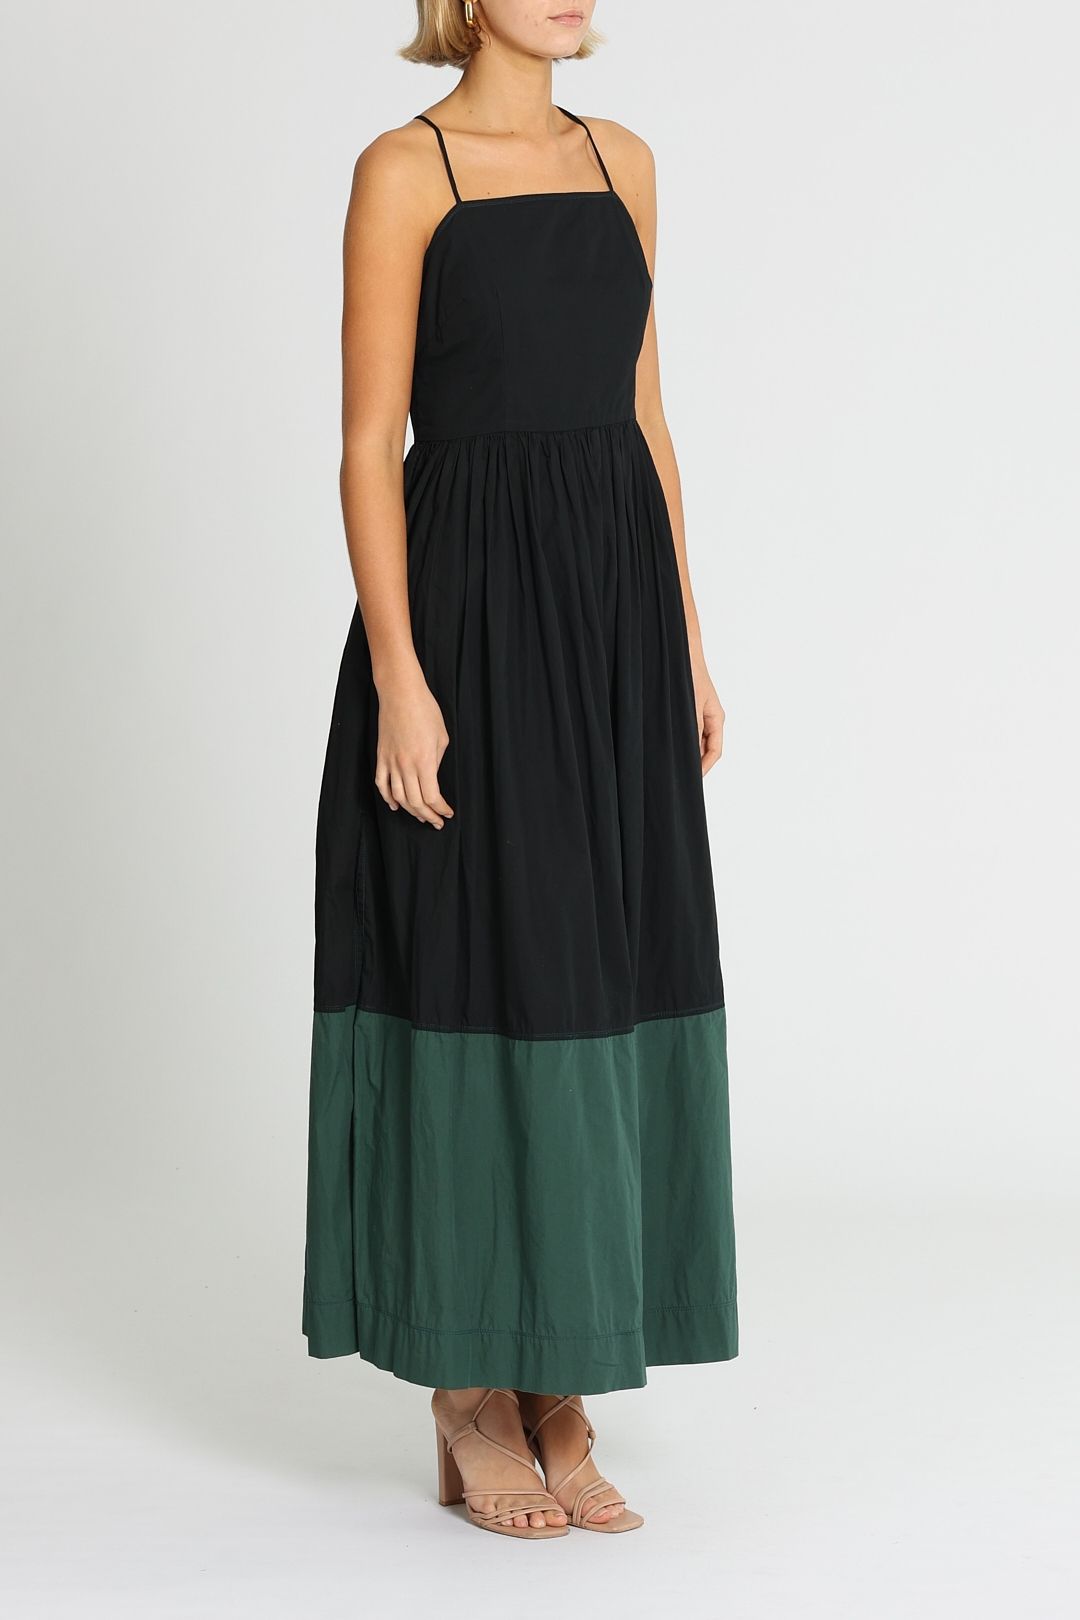 Bassike Knotted Maxi Dress Halter